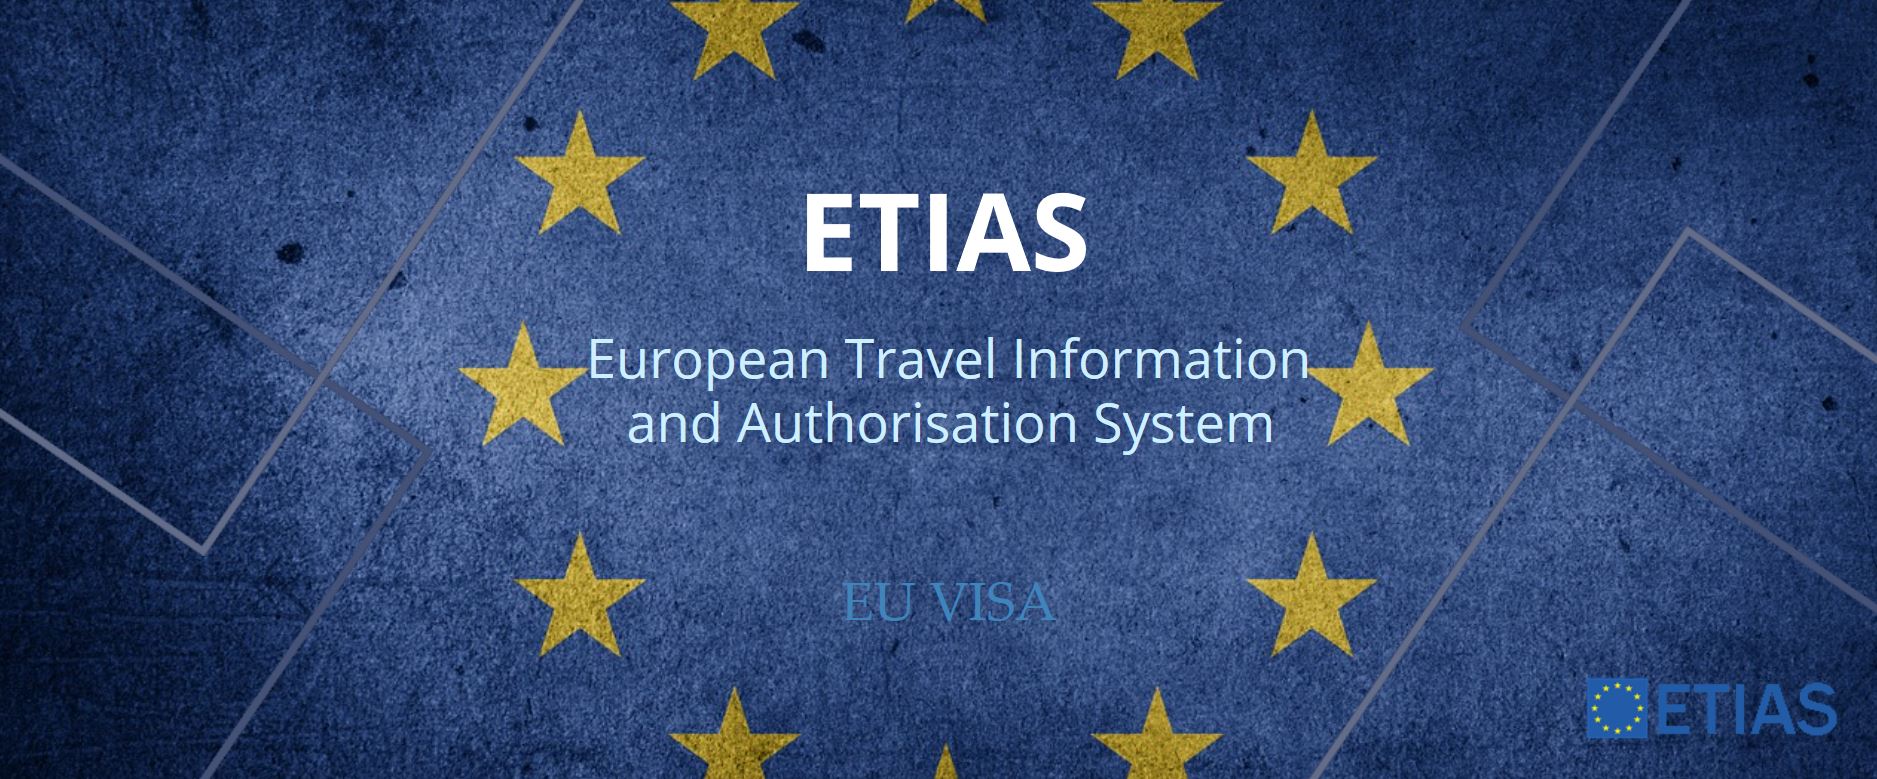 Beginning in January of next year, EU will implement ETIAS for Schengen area nations without visa.  Photo reproduced from Etias-euvisa Facebook